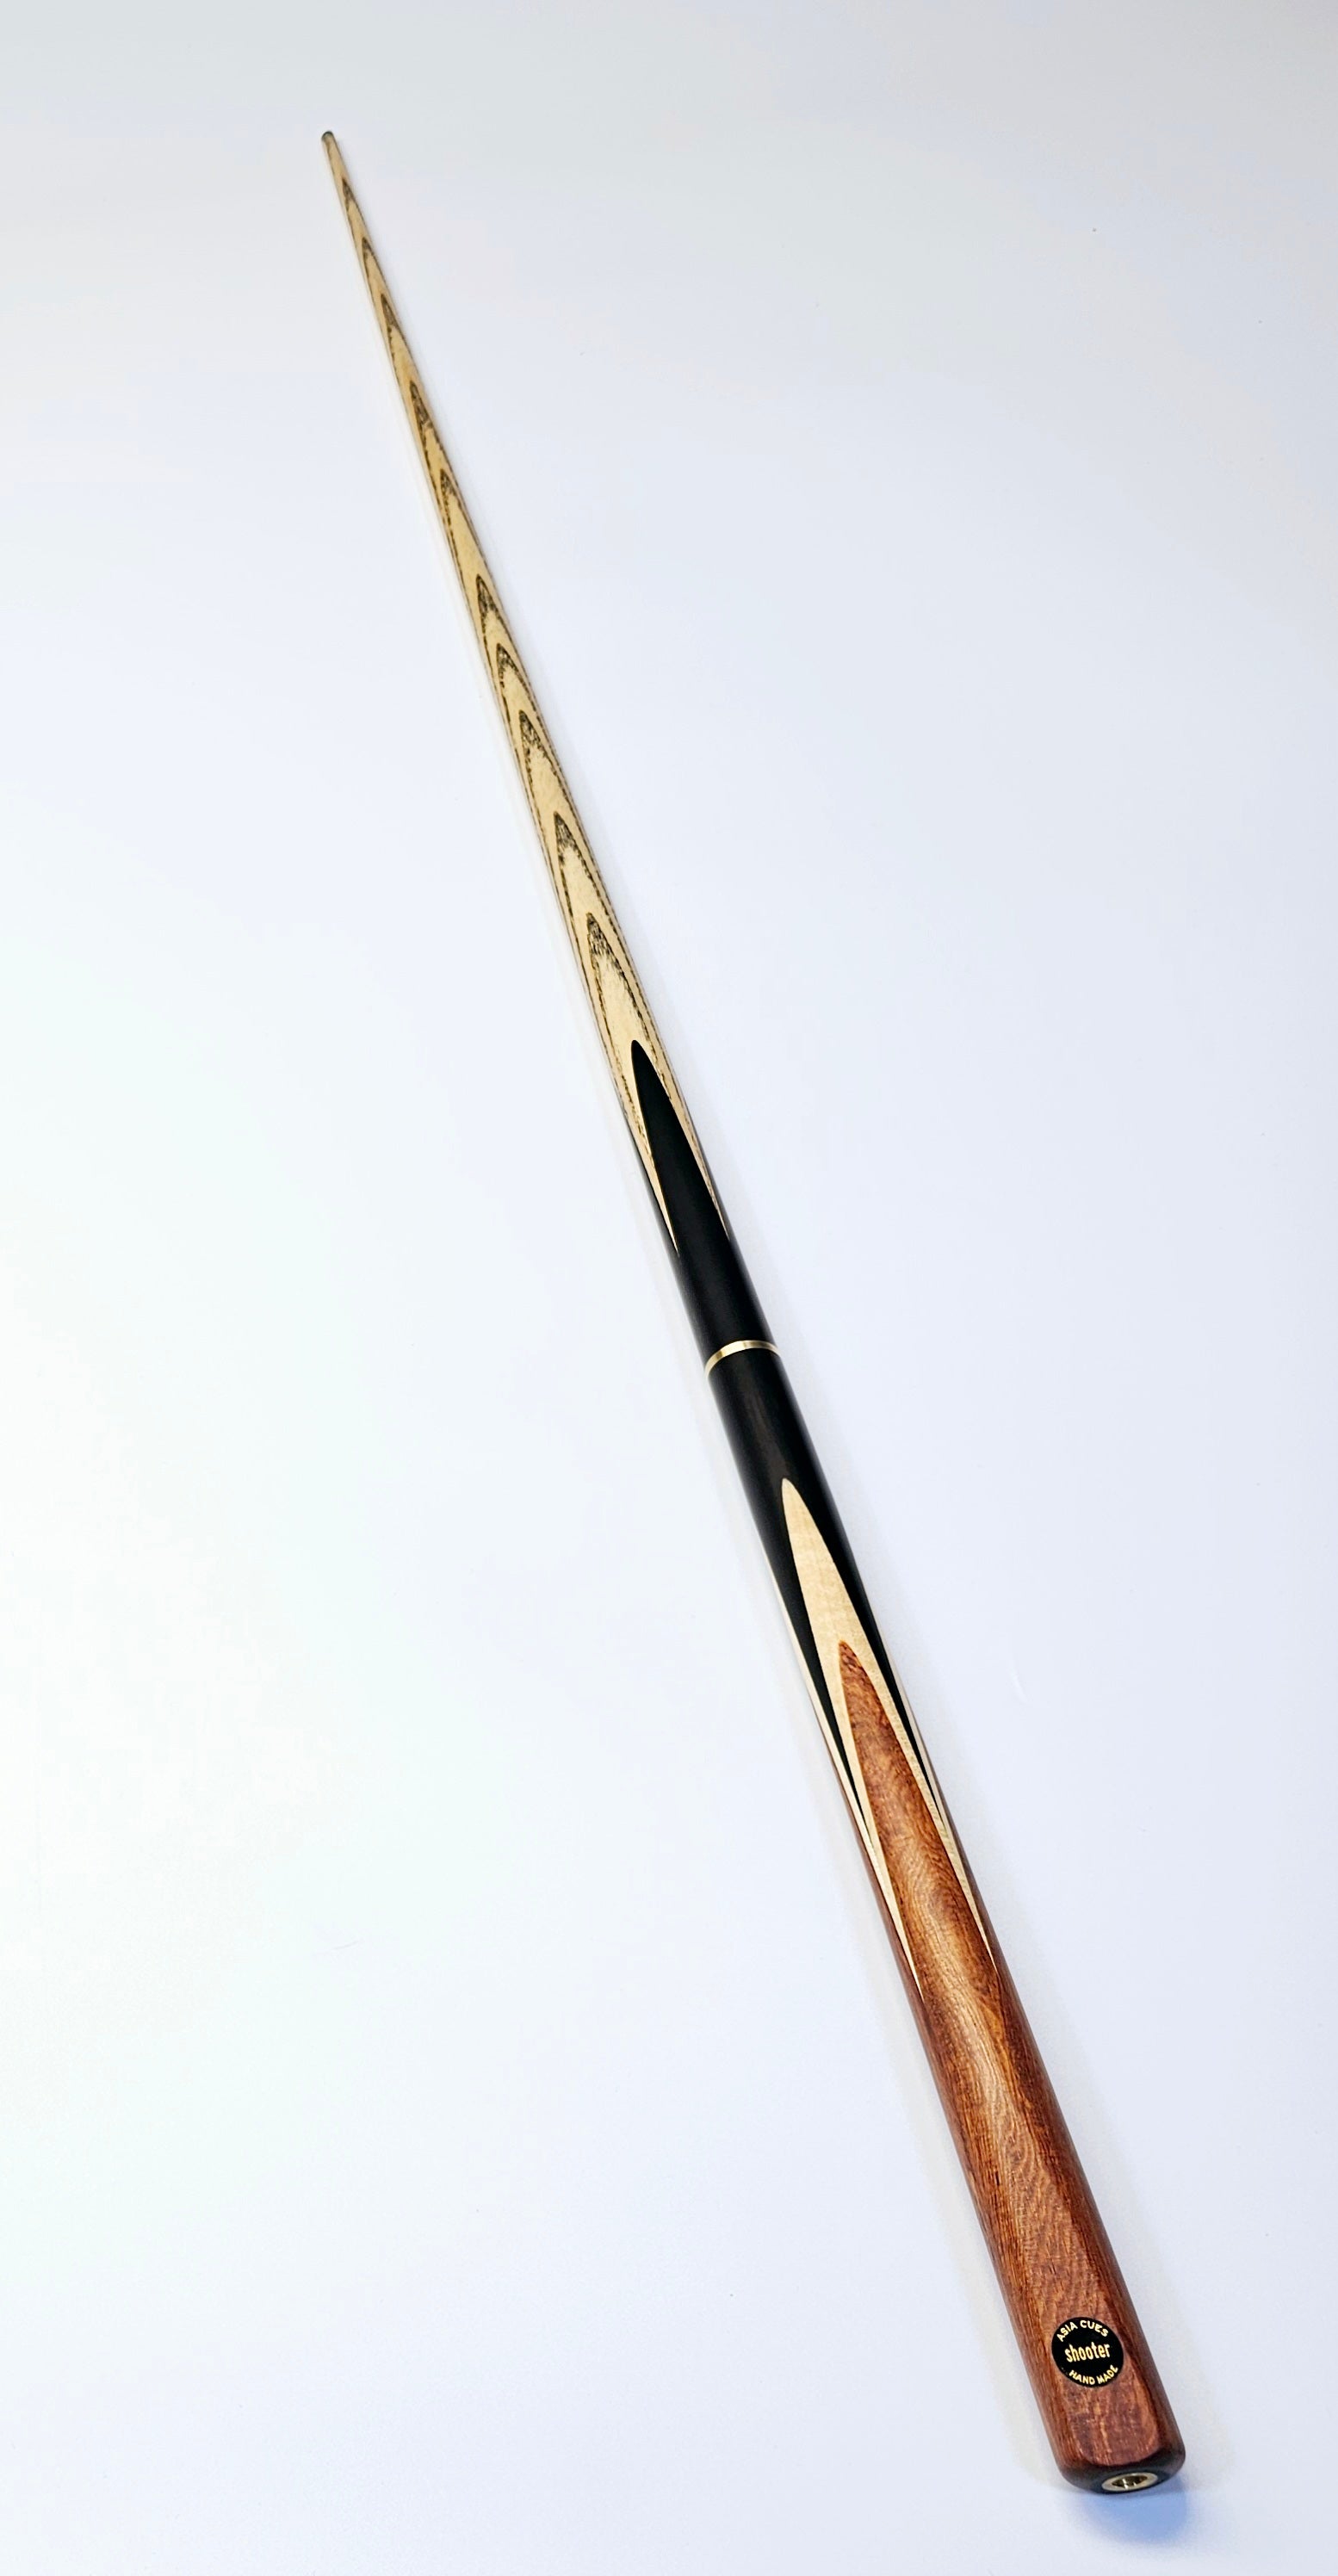 Asia Cues Shooter - 3/4 Jointed Snooker Cue 9.6mm Tip, 18.5oz, 58"